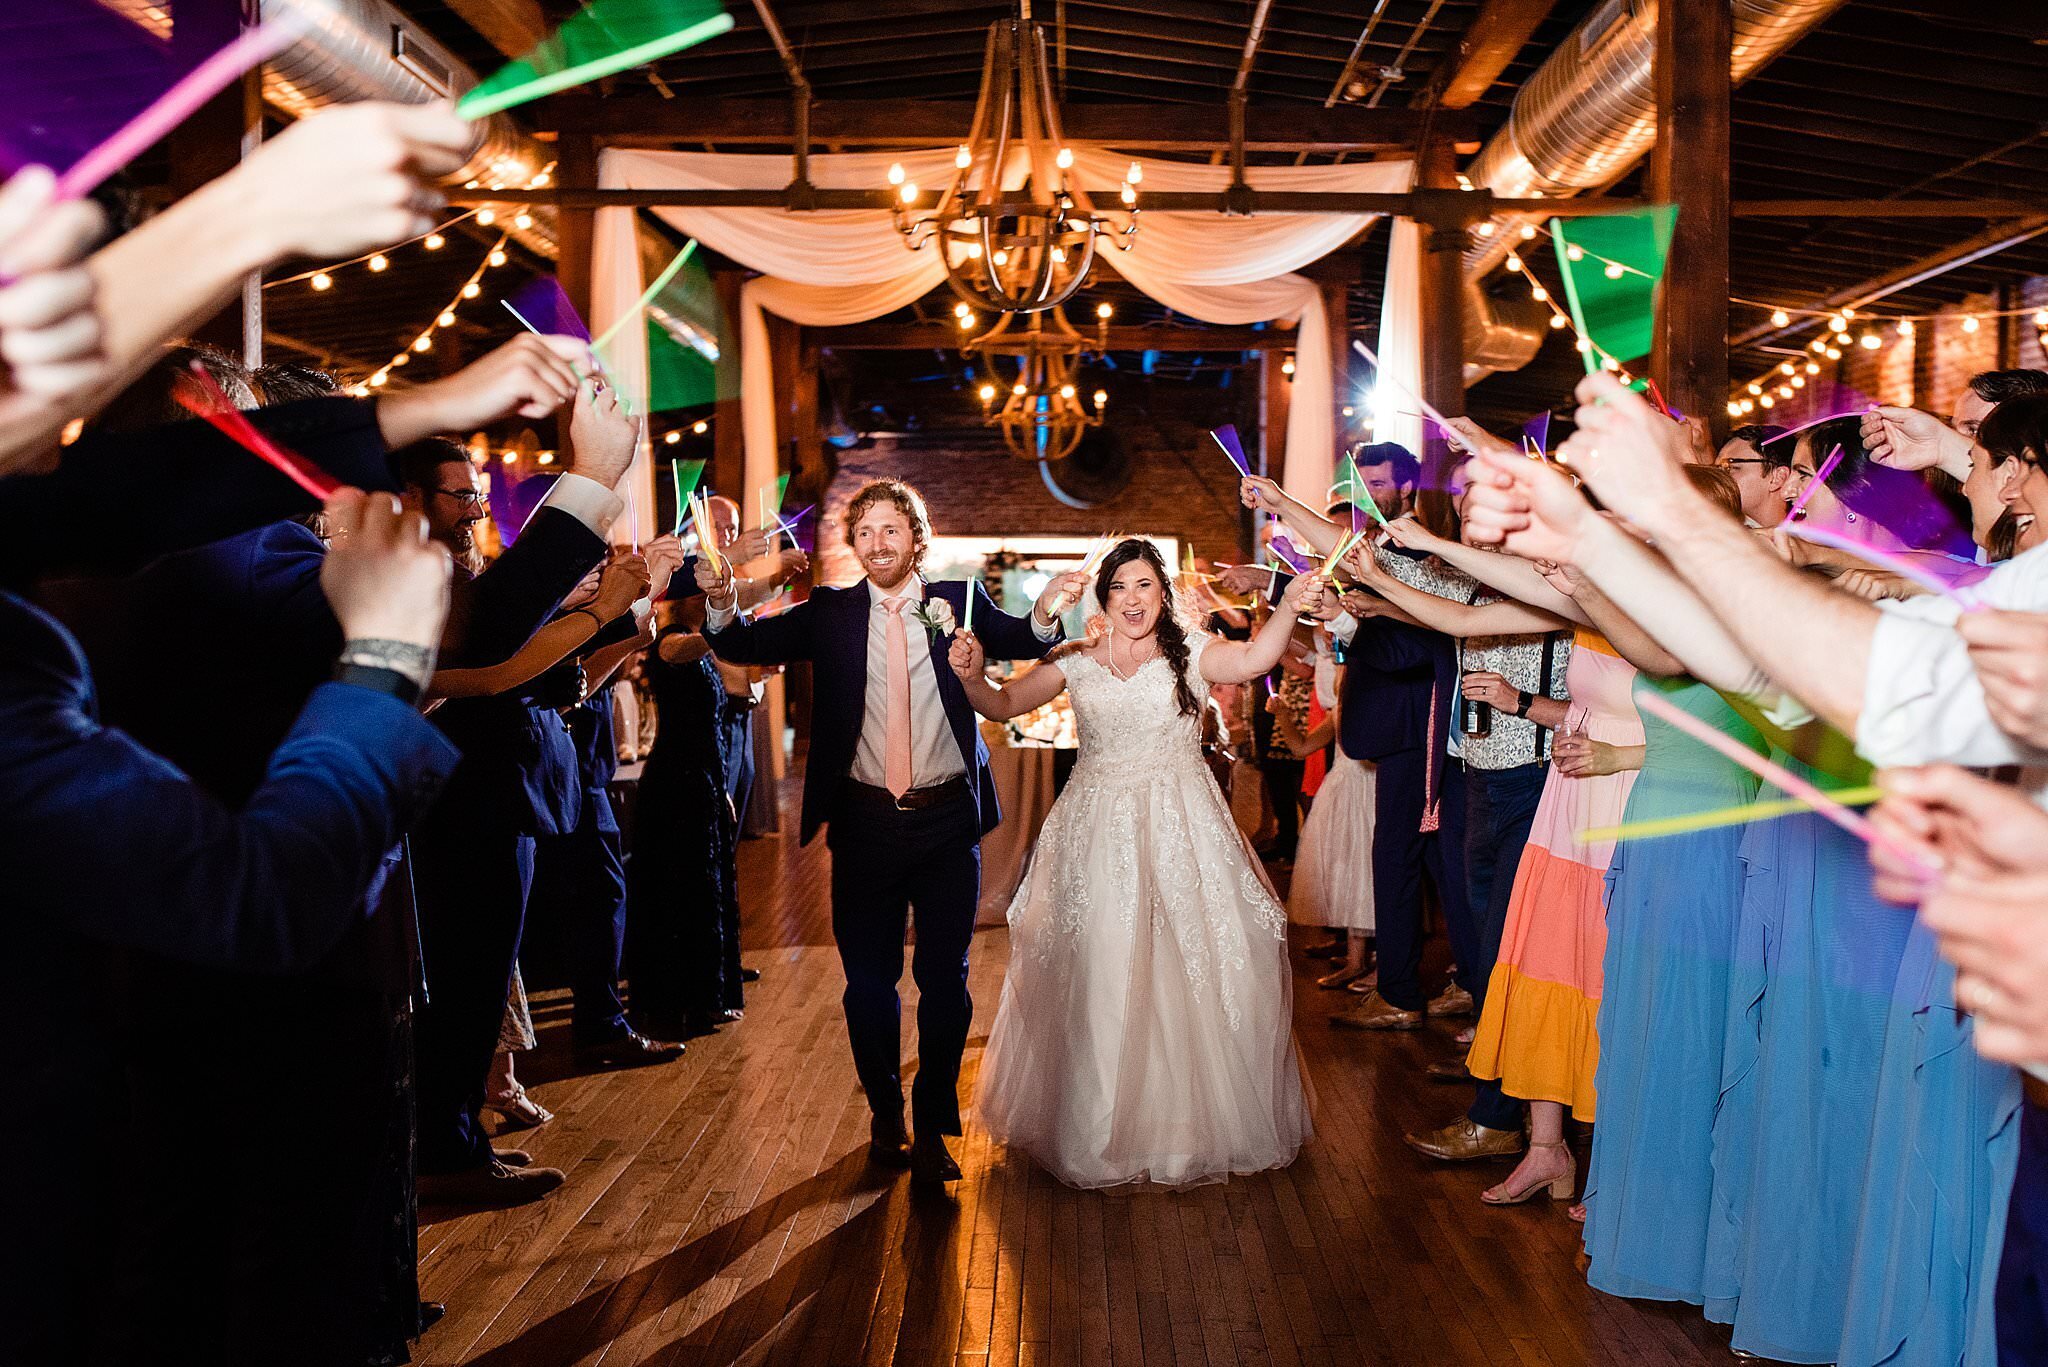 Grand exit at the end of the wedding night inside of Cannery ONE with guests waving glowsticks